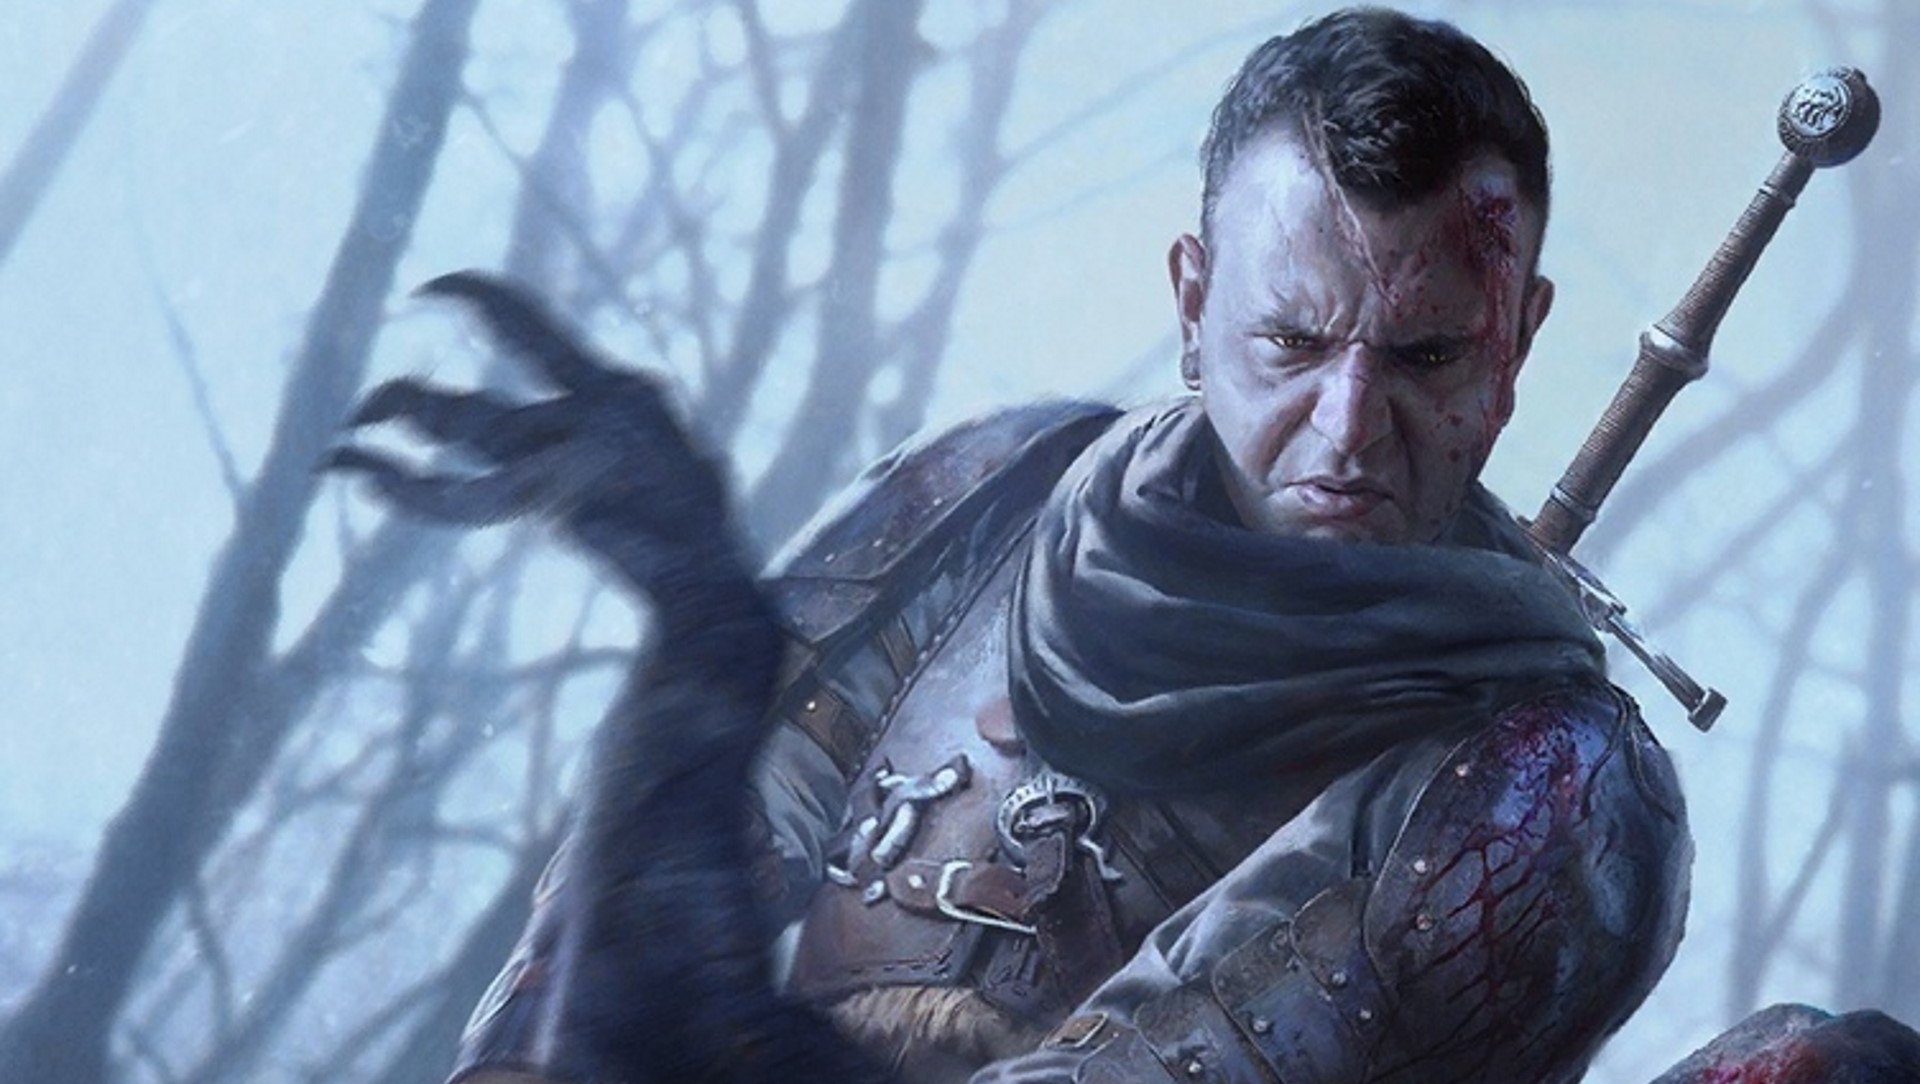  CD Projekt's next Witcher trilogy has a new game director 